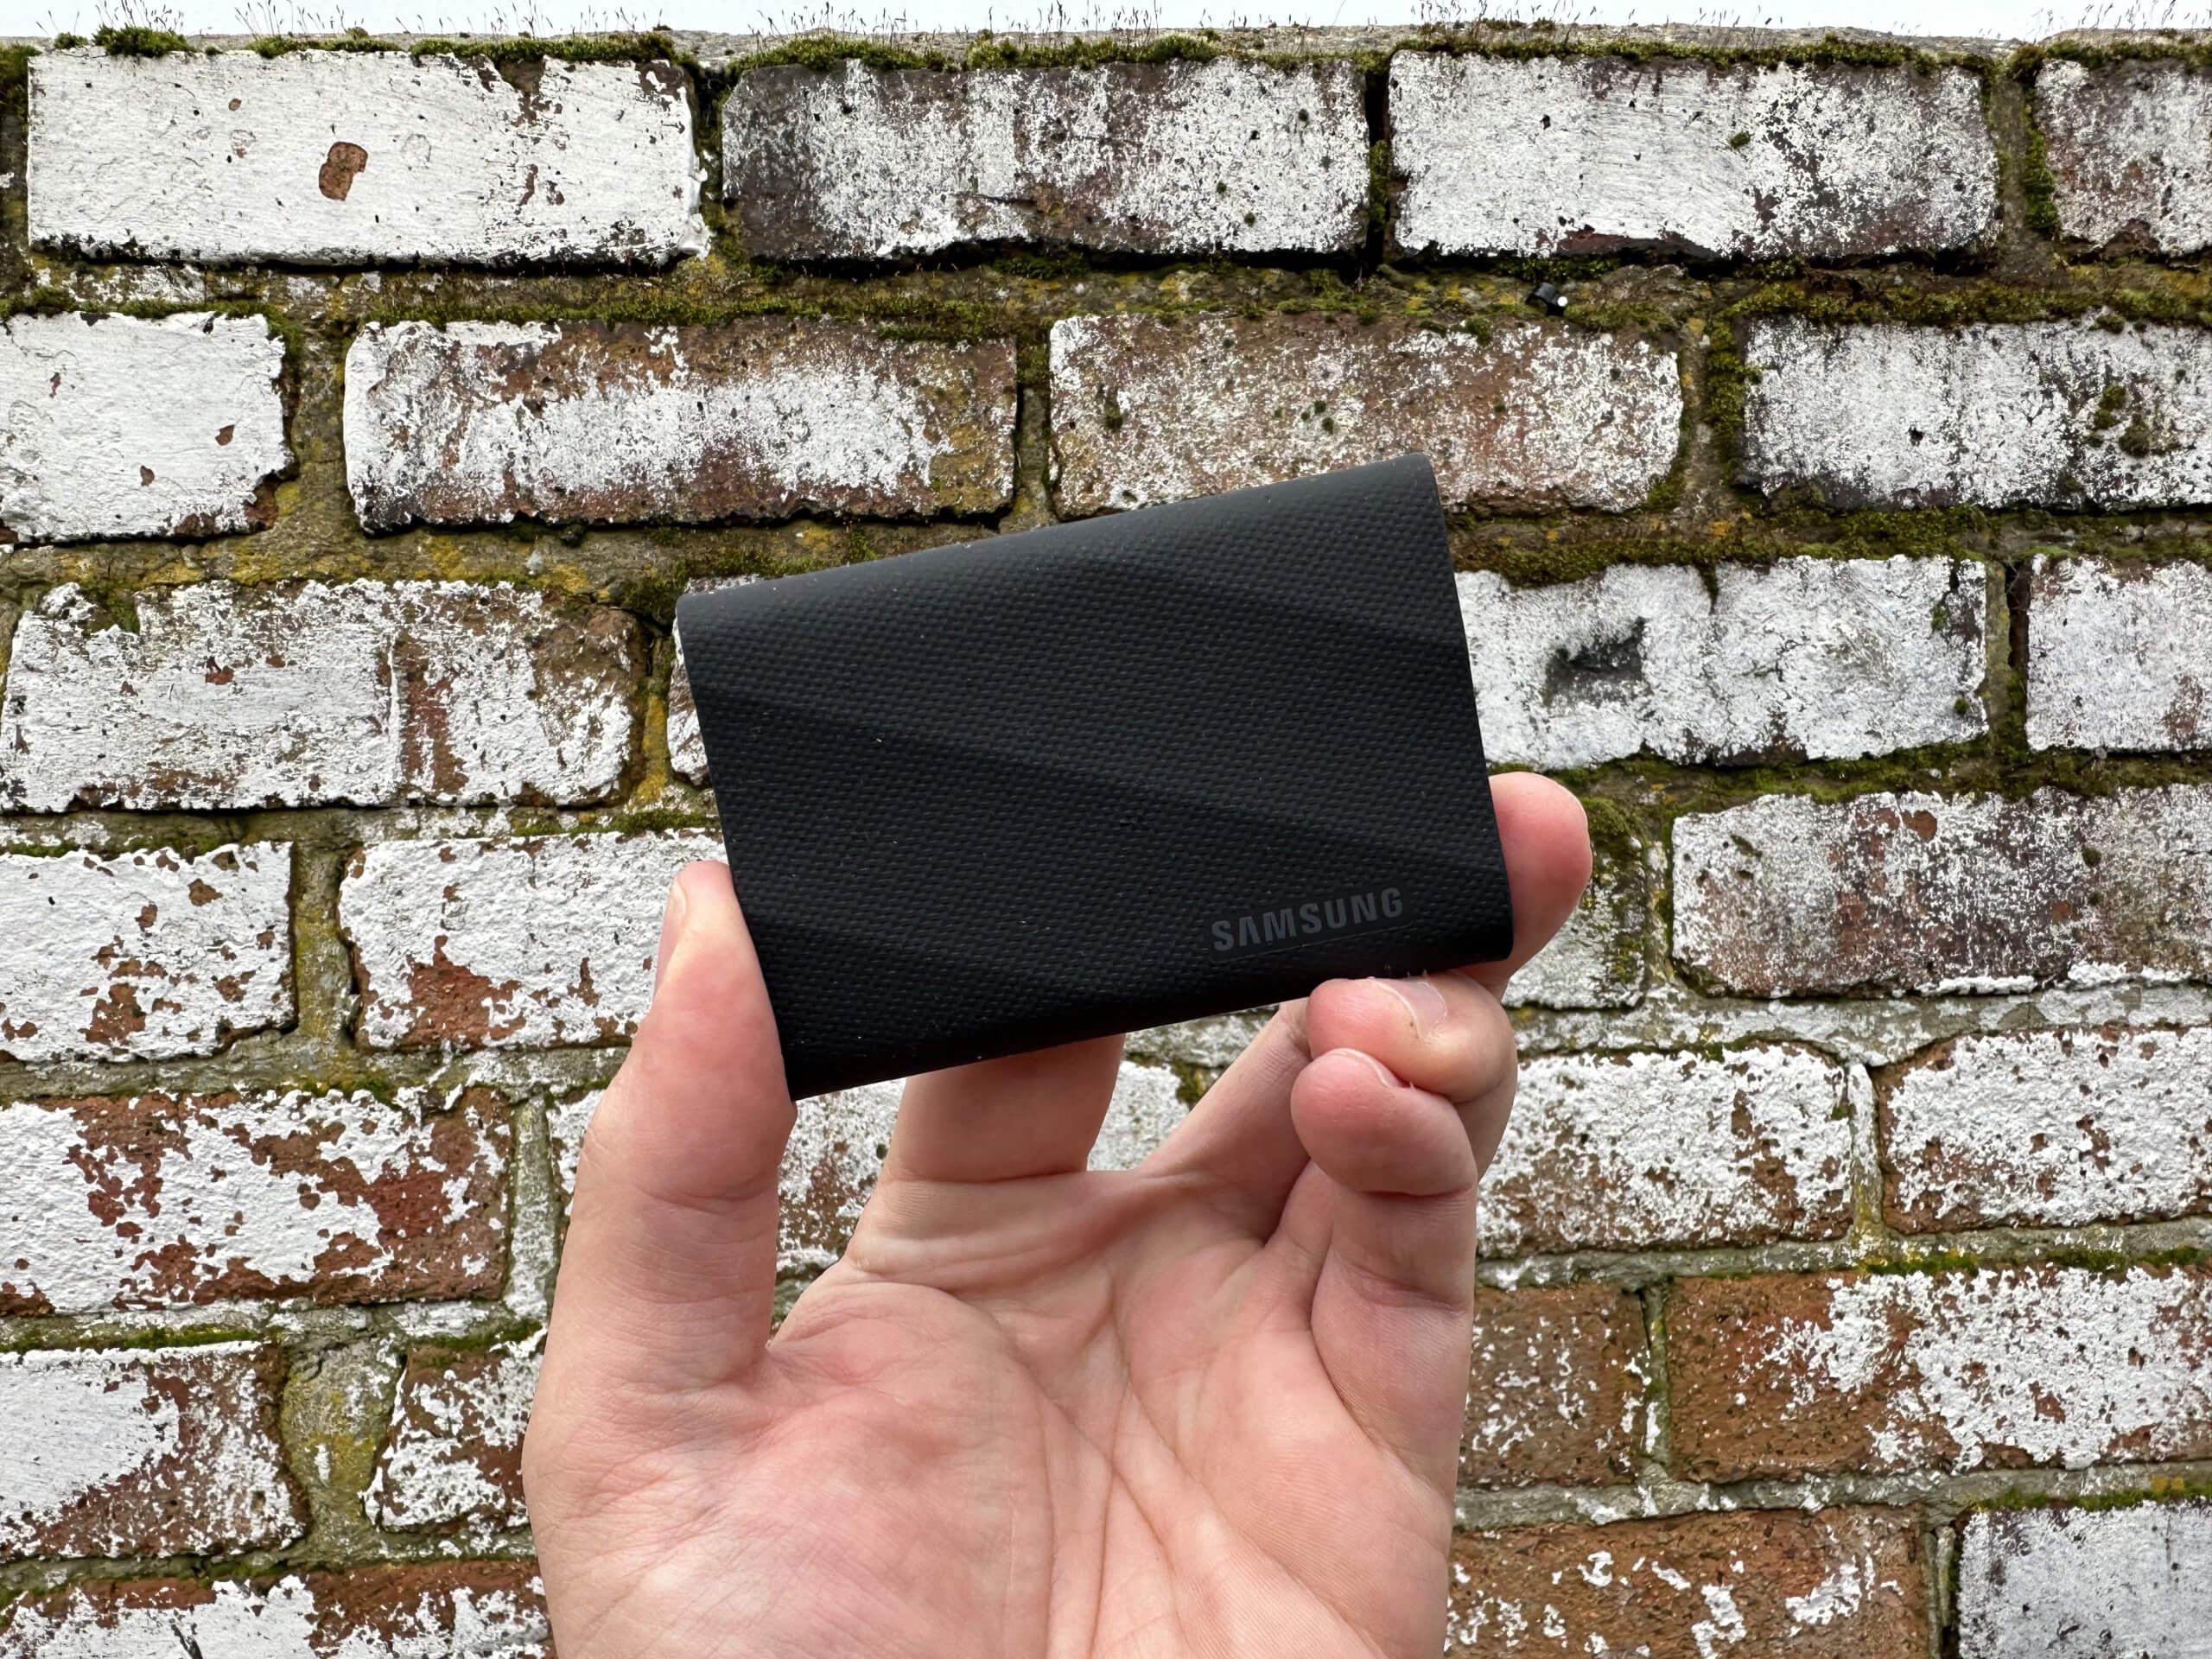 the samsung T9 portable SSD being held at fingertips in front of a brick wall